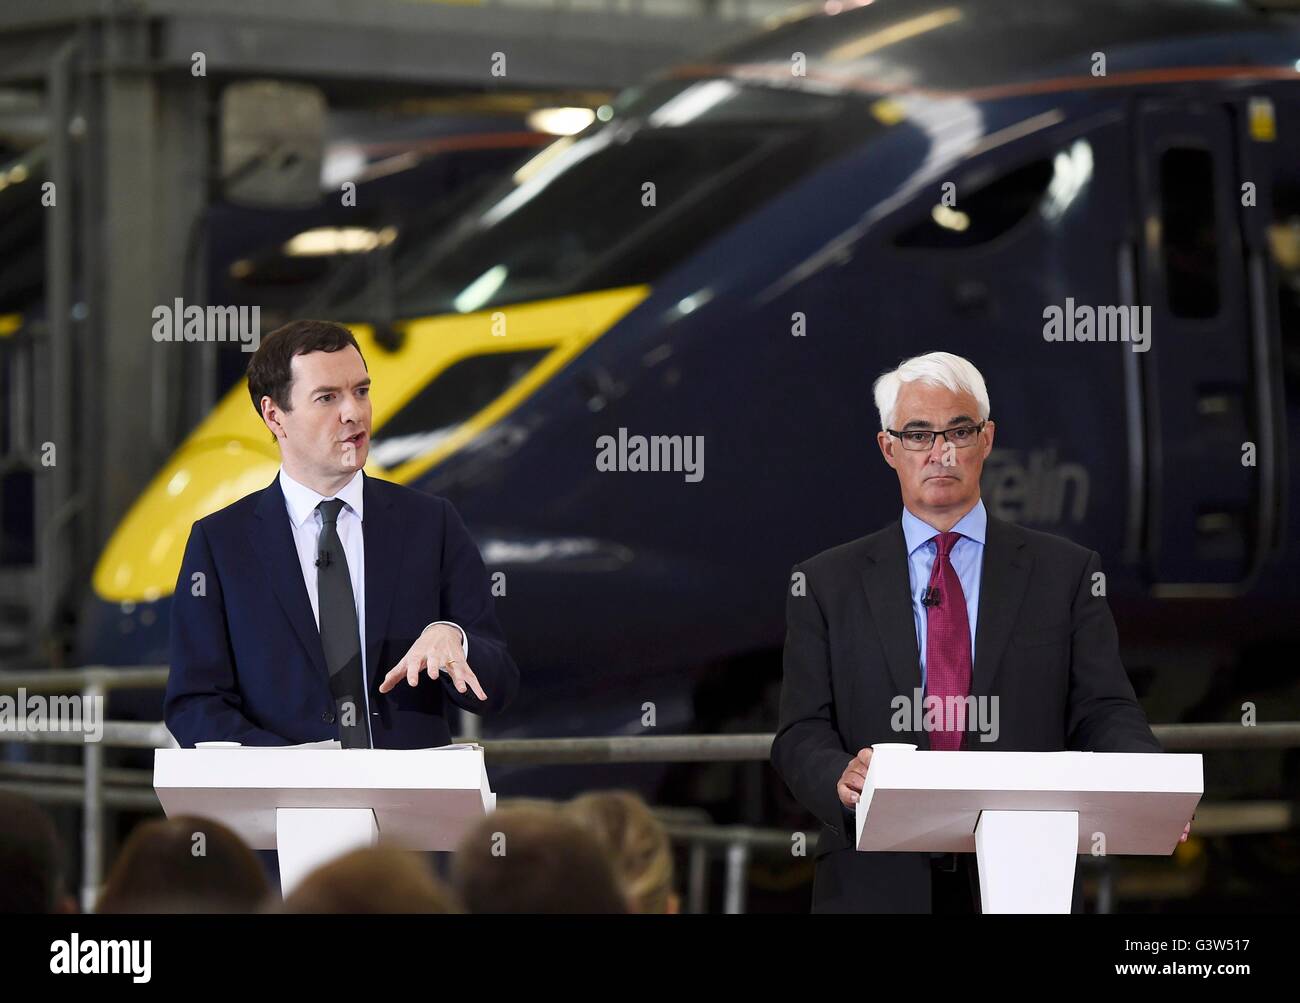 Chancellor George Osborne (left) and former Chancellor Alistair Darling at a pro-Remain event at the Hitachi Rail Europe plant in Ashford, Kent. Stock Photo